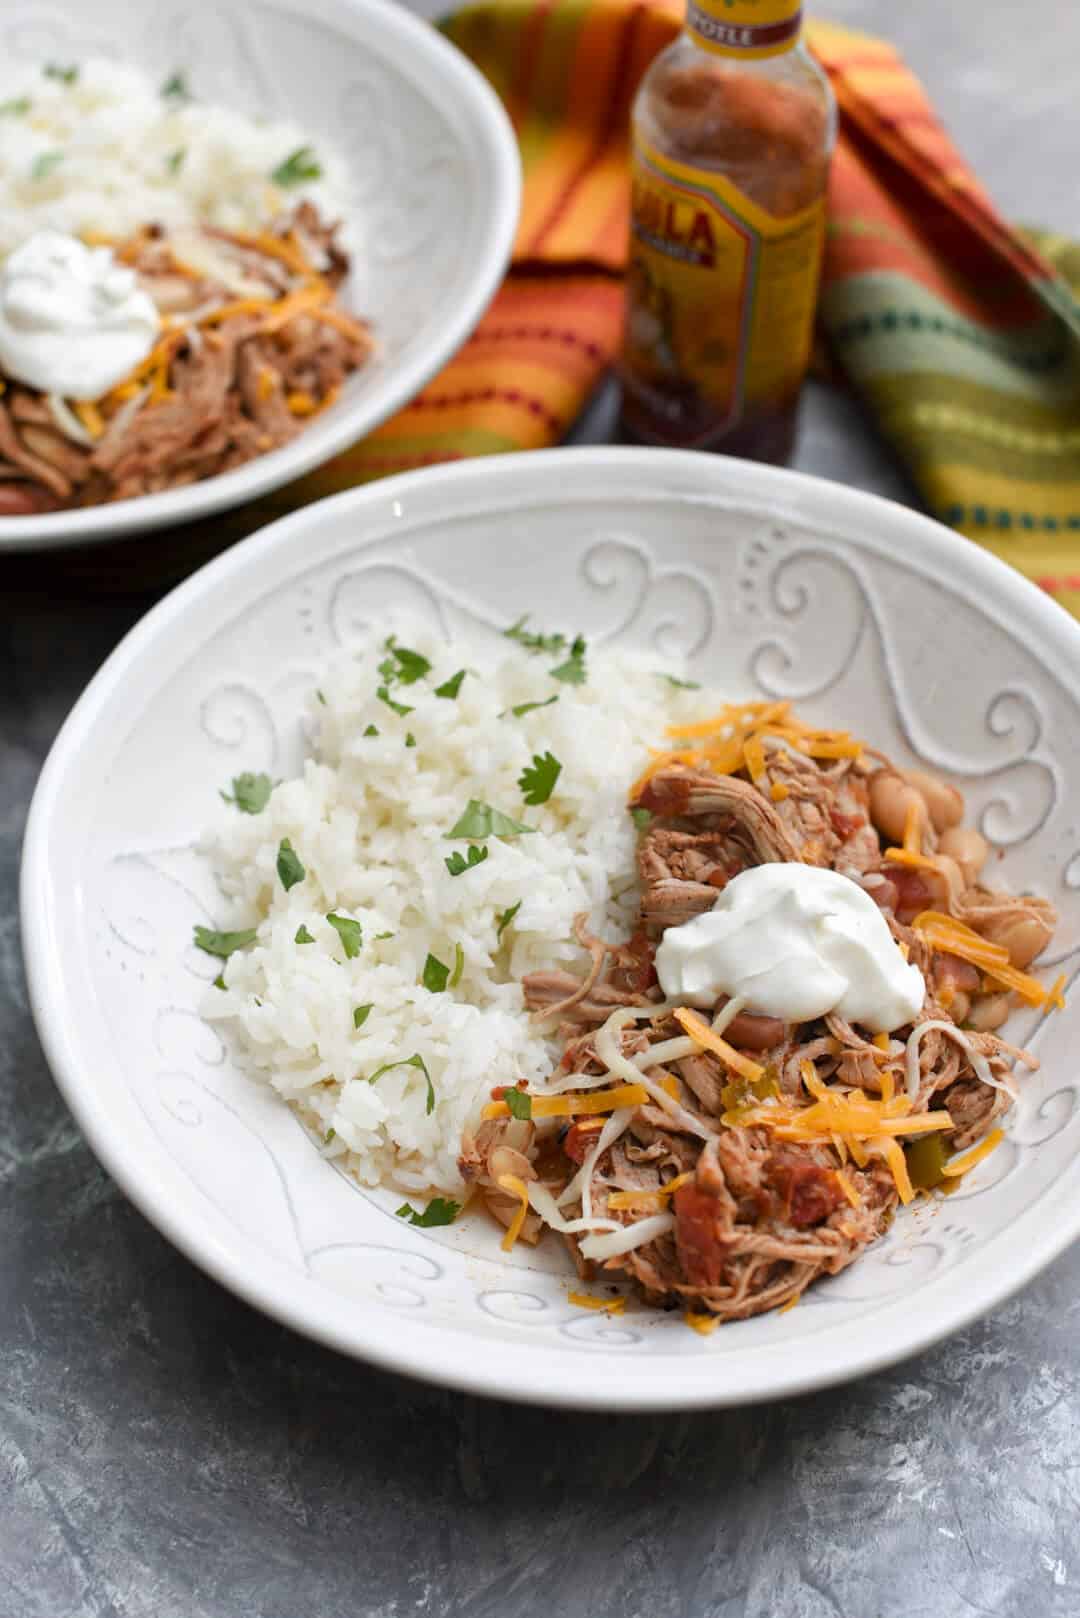 Shredded Mexican Pork and Beans topped with sour cream in a white bowl.